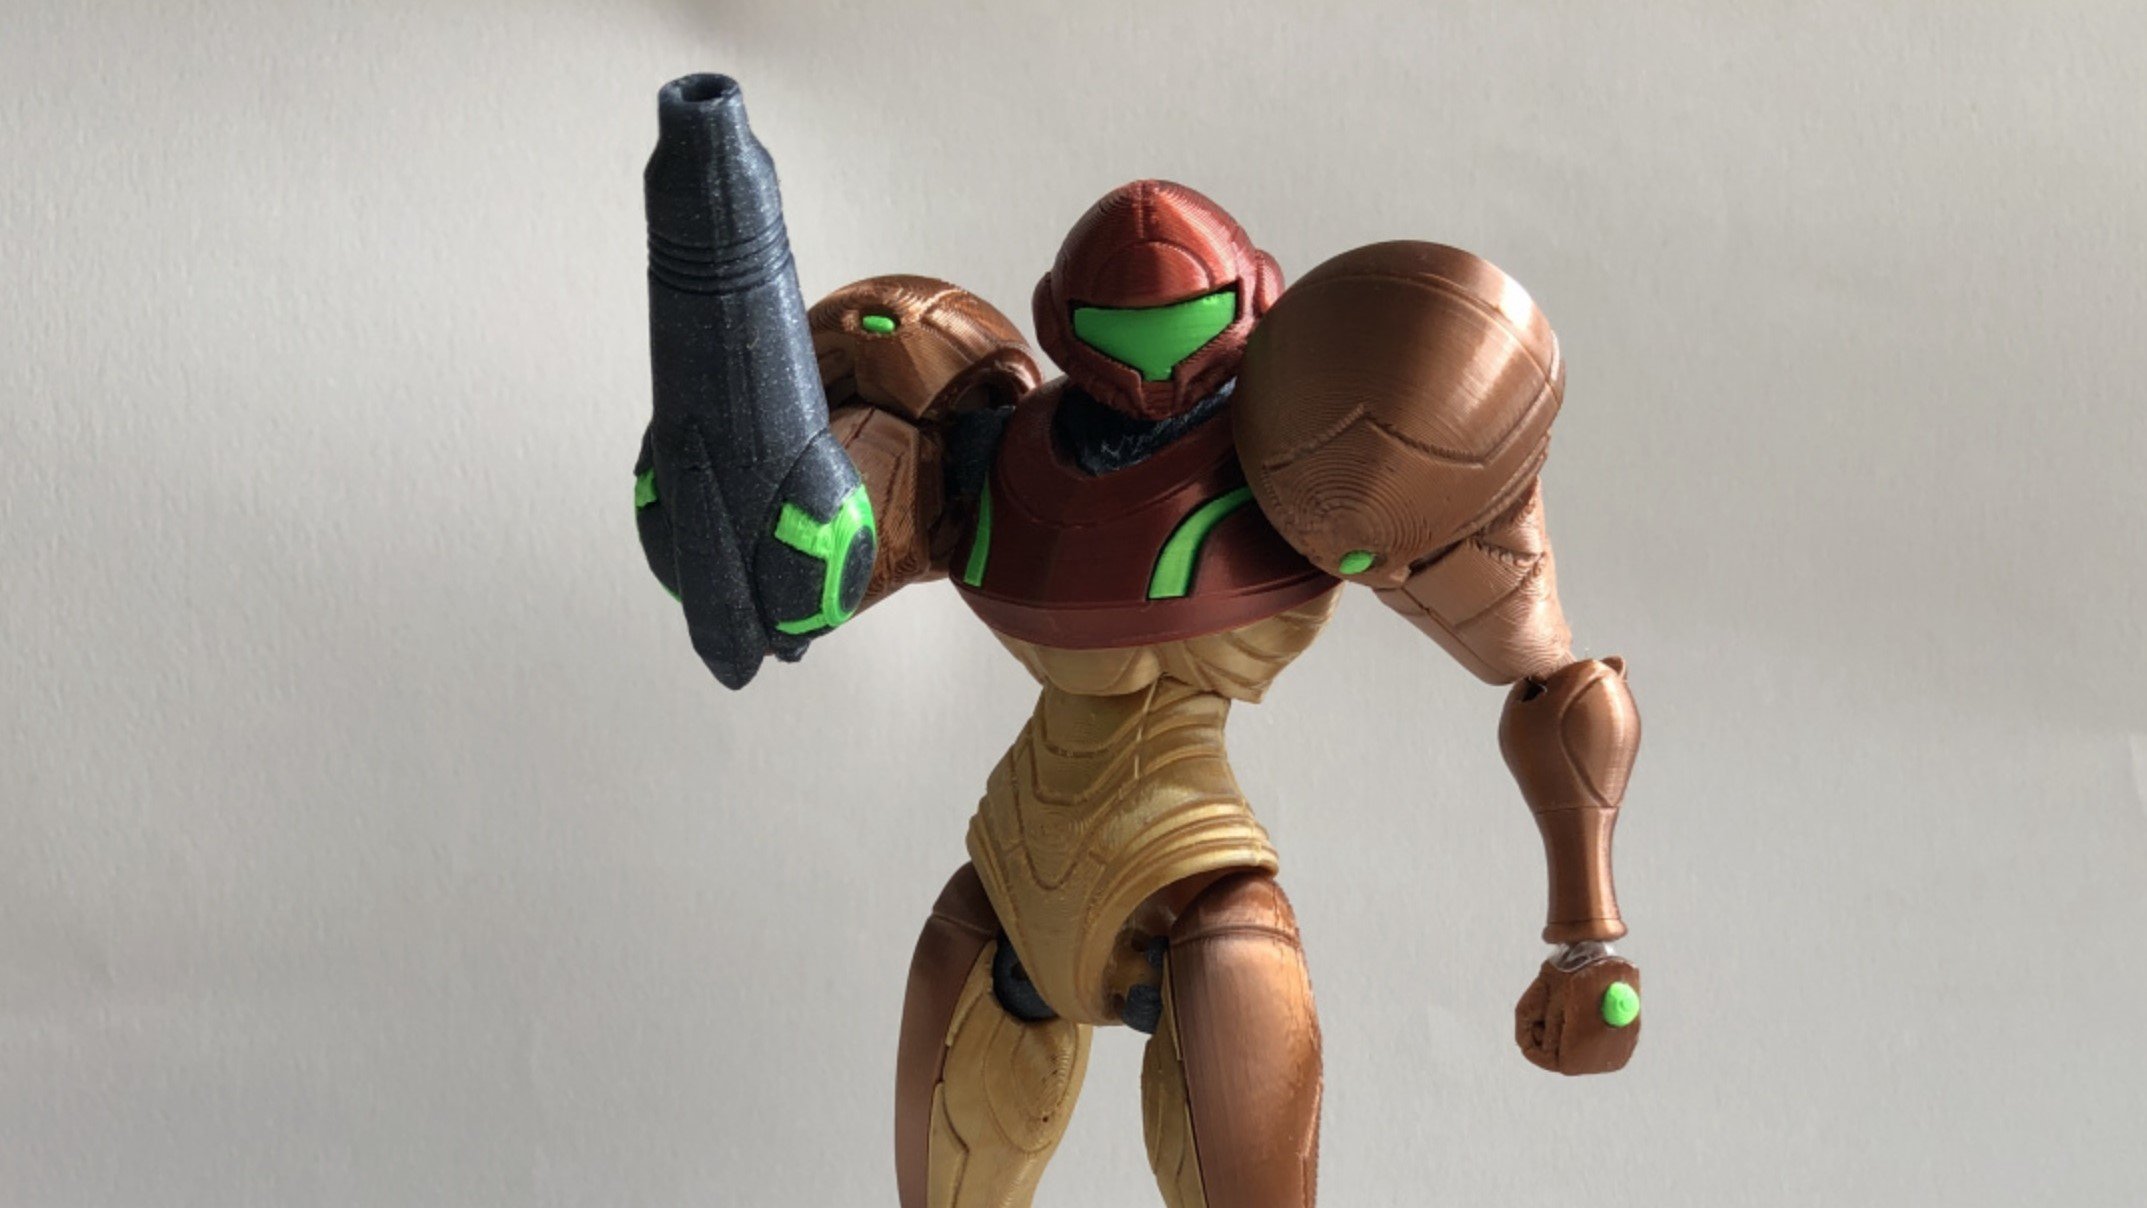 3D Print Action Figures: All You Need to Know | All3DP